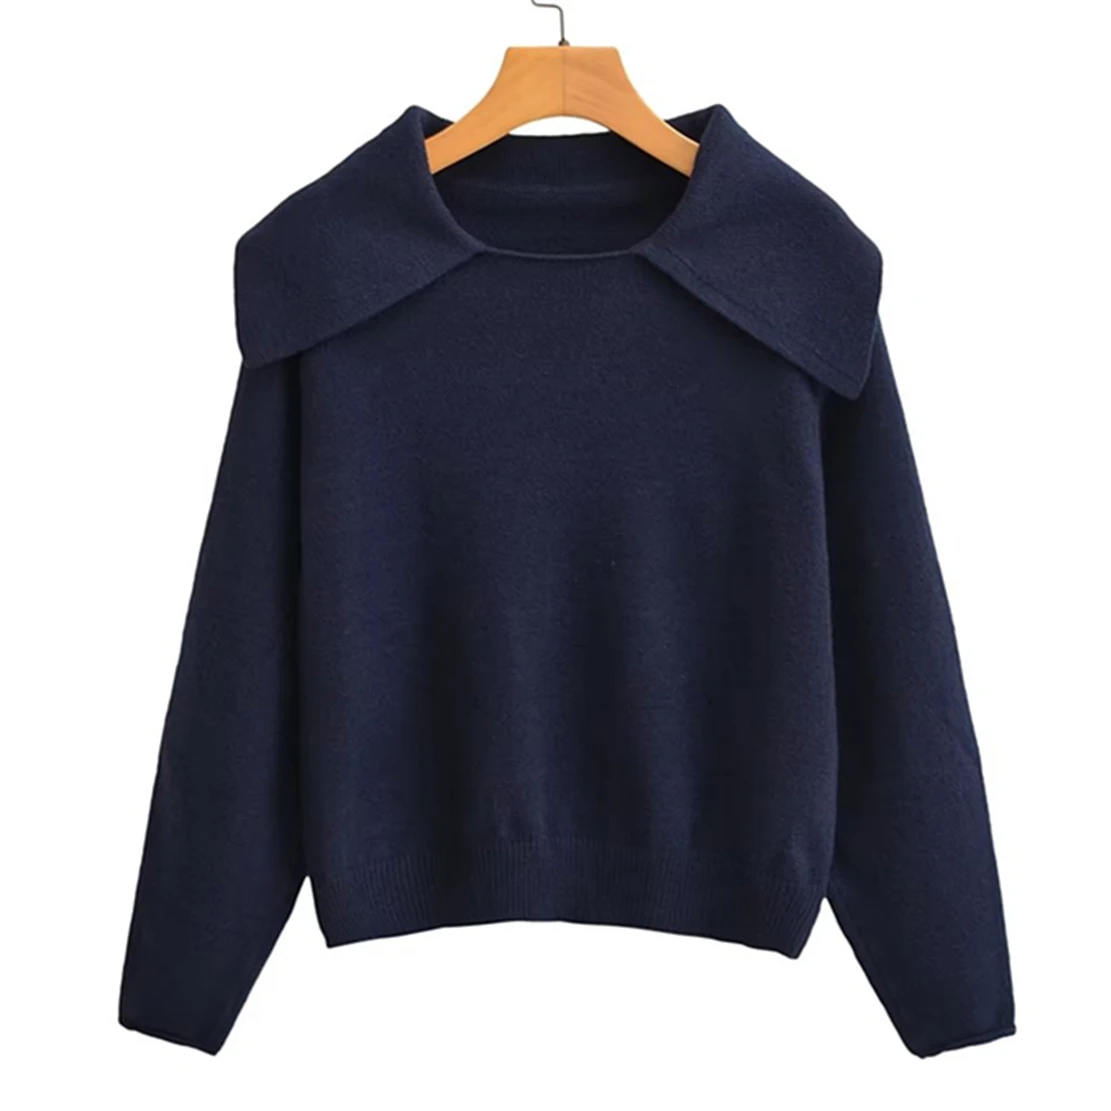 

Dave&Di Collar Navy Color Knitwear Casual England Style Peter Pan Sweaters Women